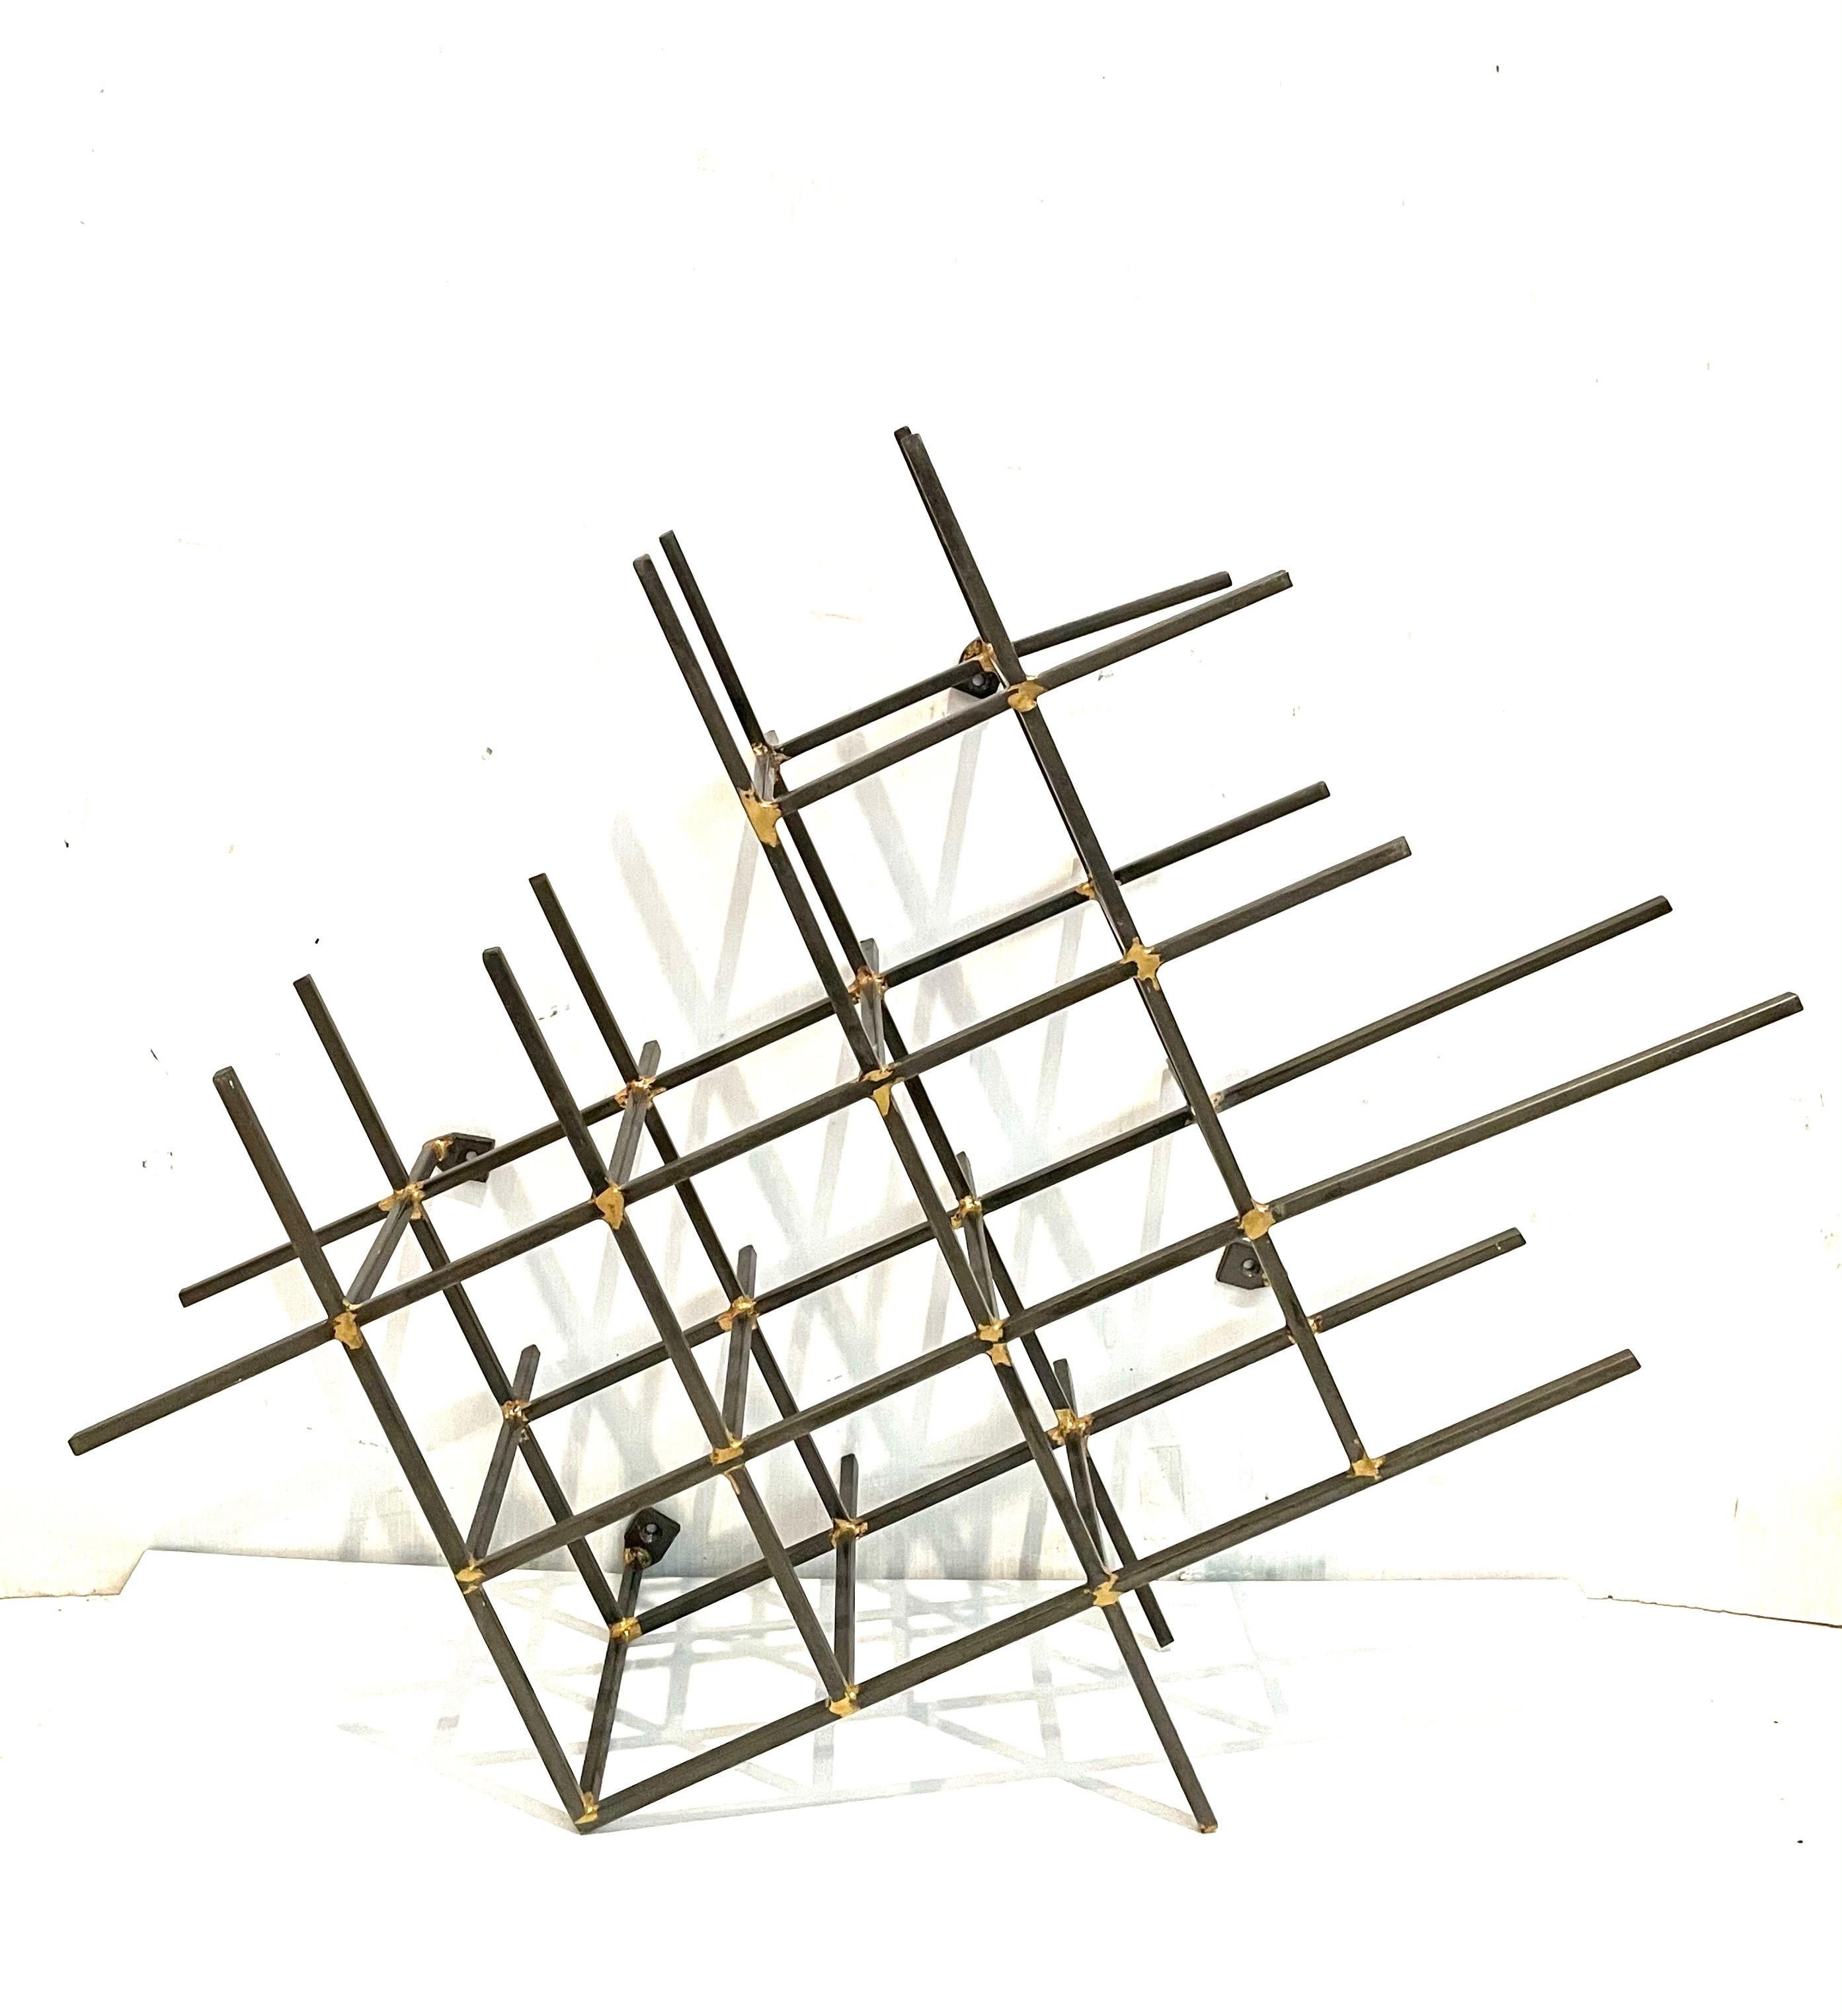 Modernist Abstract Steel & Brass Welded Wall Sculpture In Good Condition For Sale In San Diego, CA